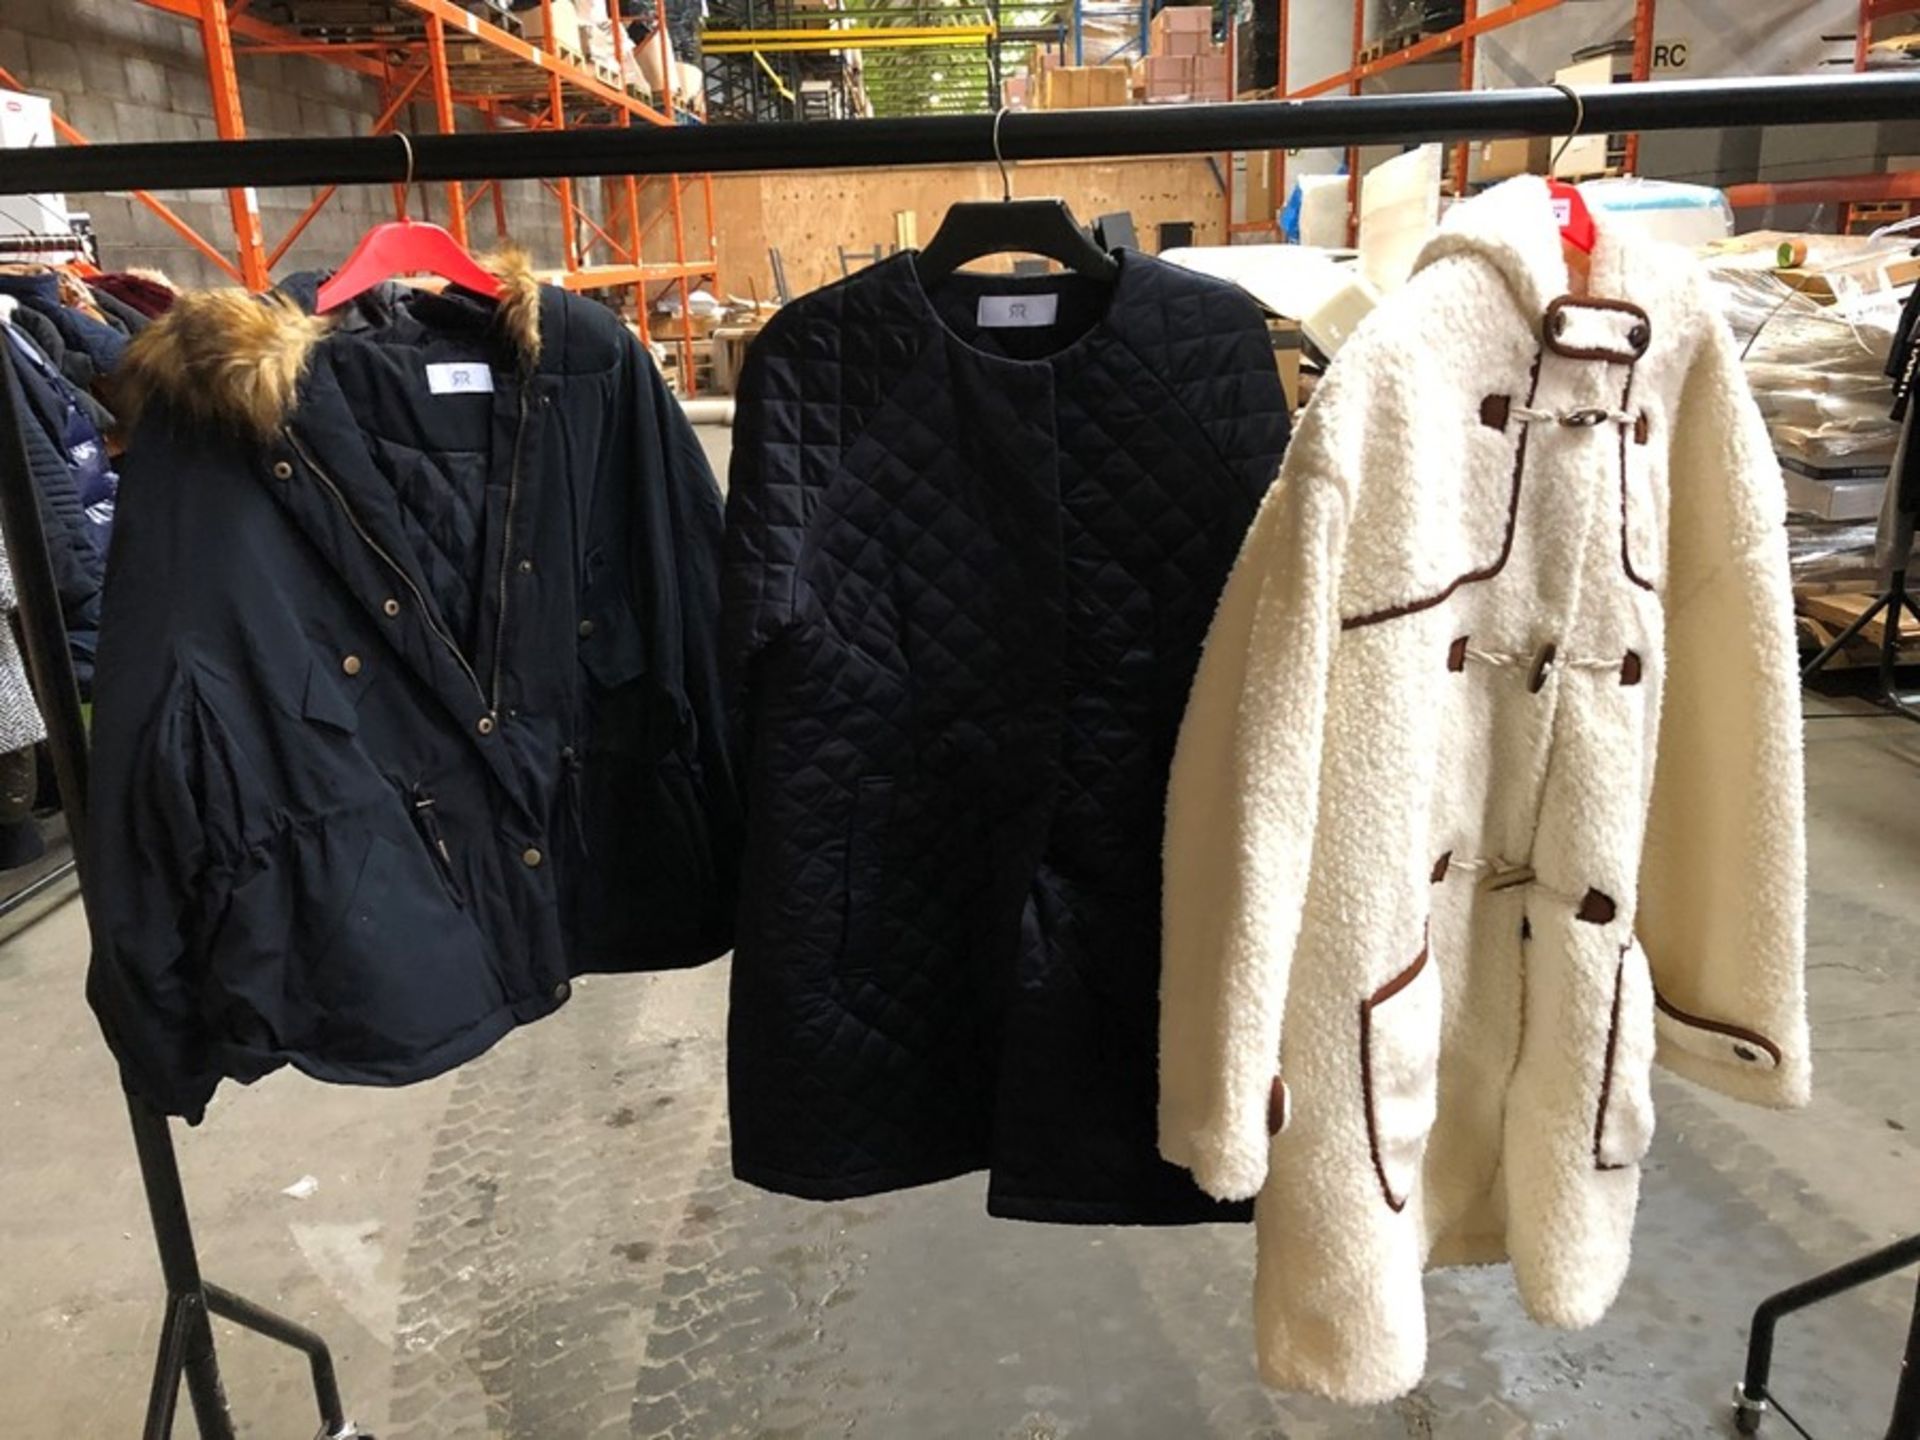 1 LOT TO CONTAIN 3 ITEMS OF DESIGNER COATS/JACKETS / UK SIZES FROM LEFT TO RIGHT: 18, 16, 22 (PUBLIC